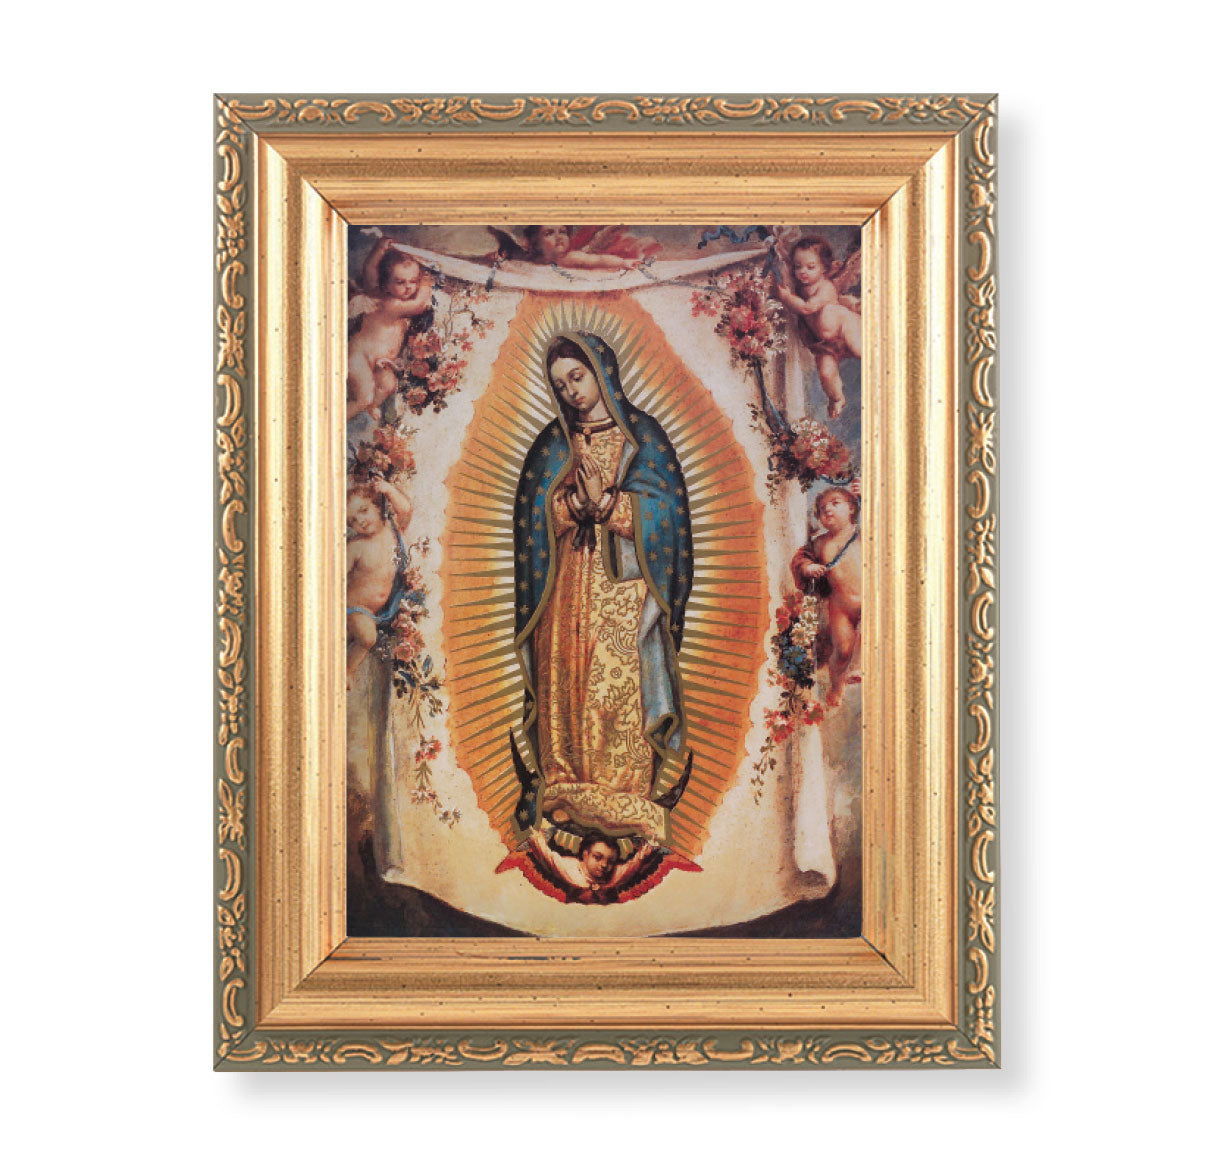 Our Lady of Guadalupe Antique Gold Framed Art